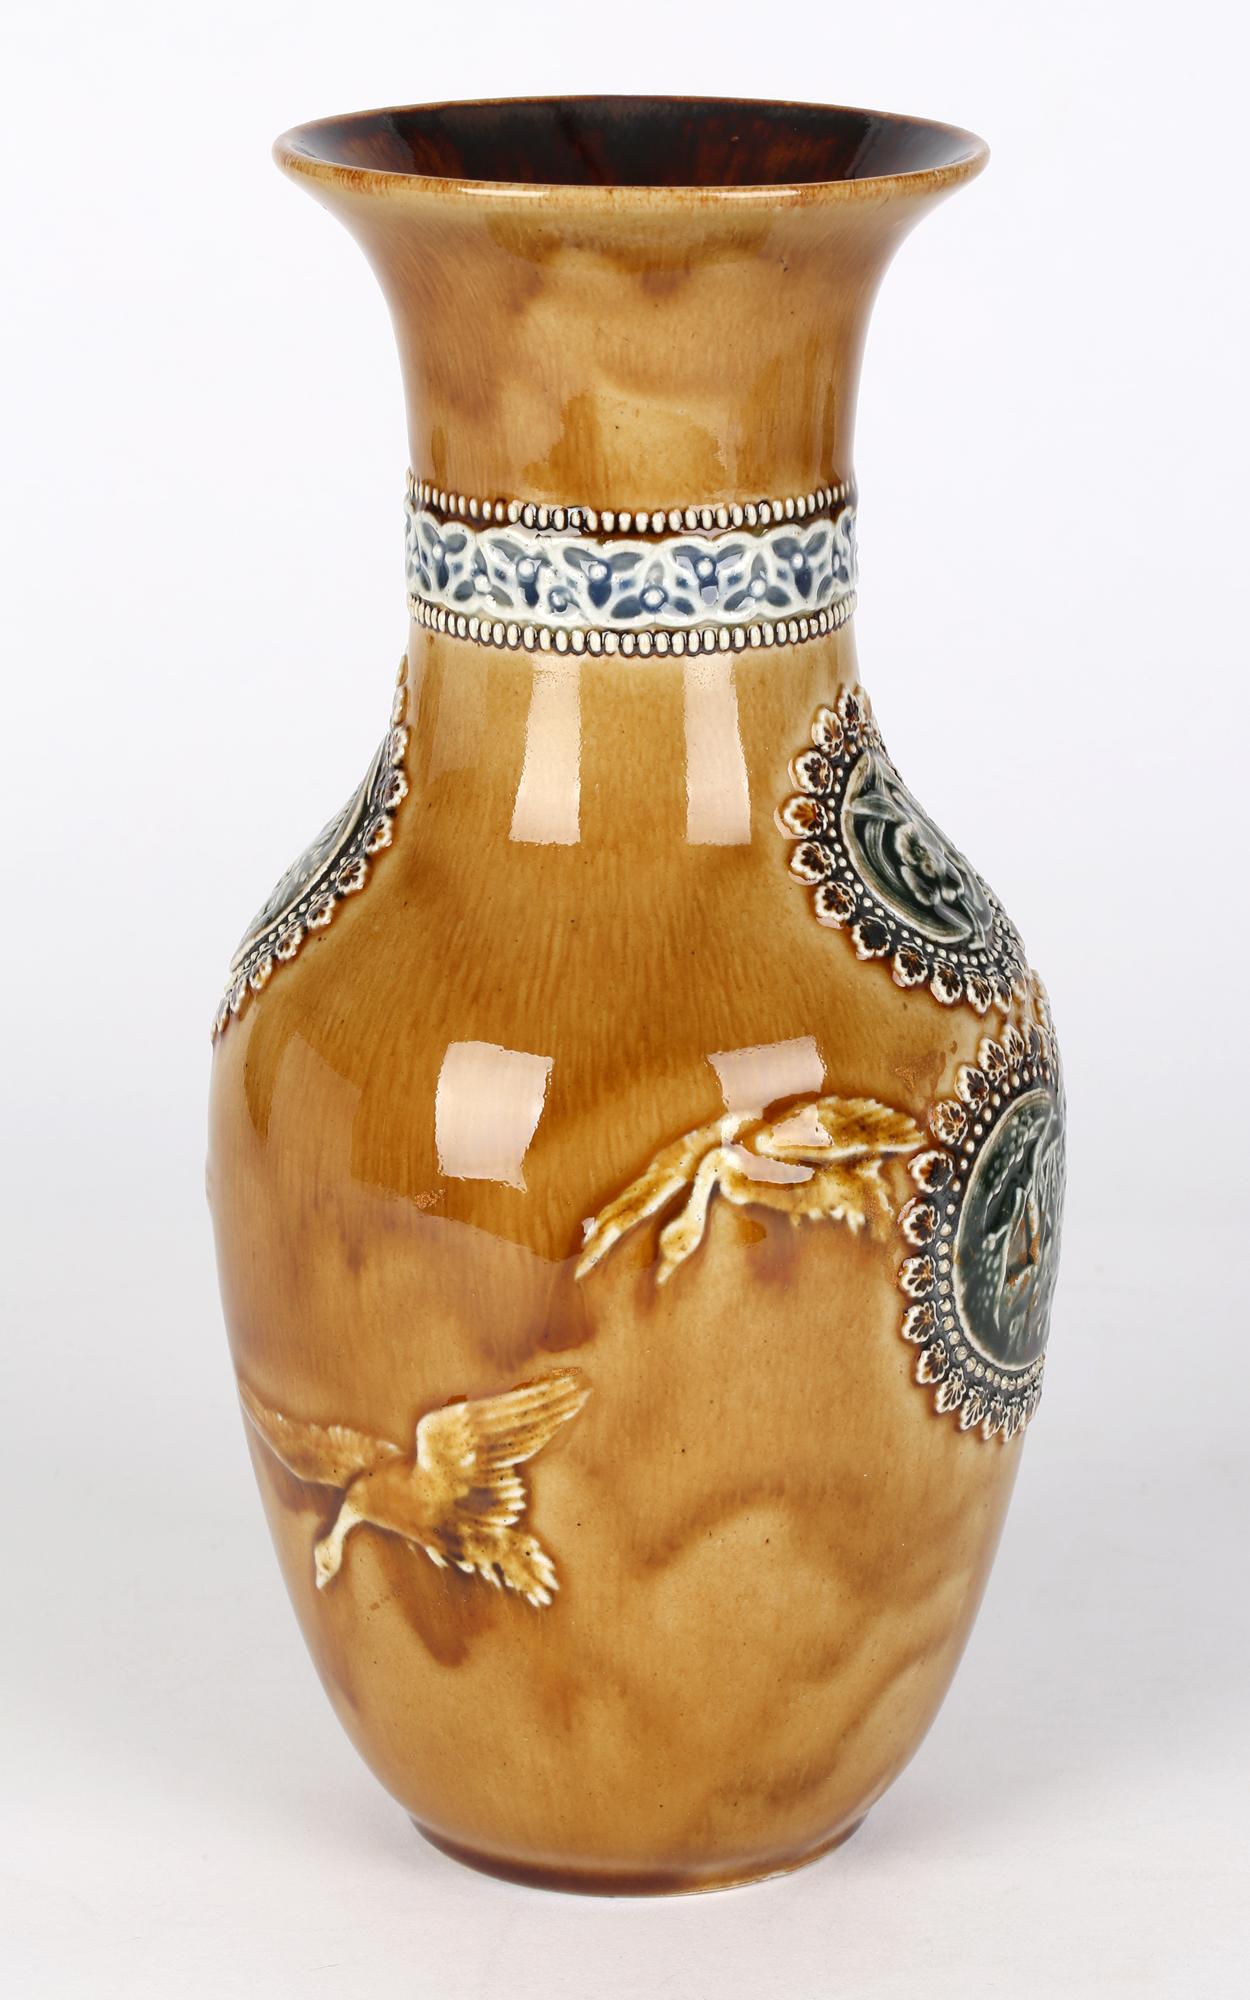 Doulton Lambeth Aesthetic Movement Vase with Geese by Lizzie Axford 4